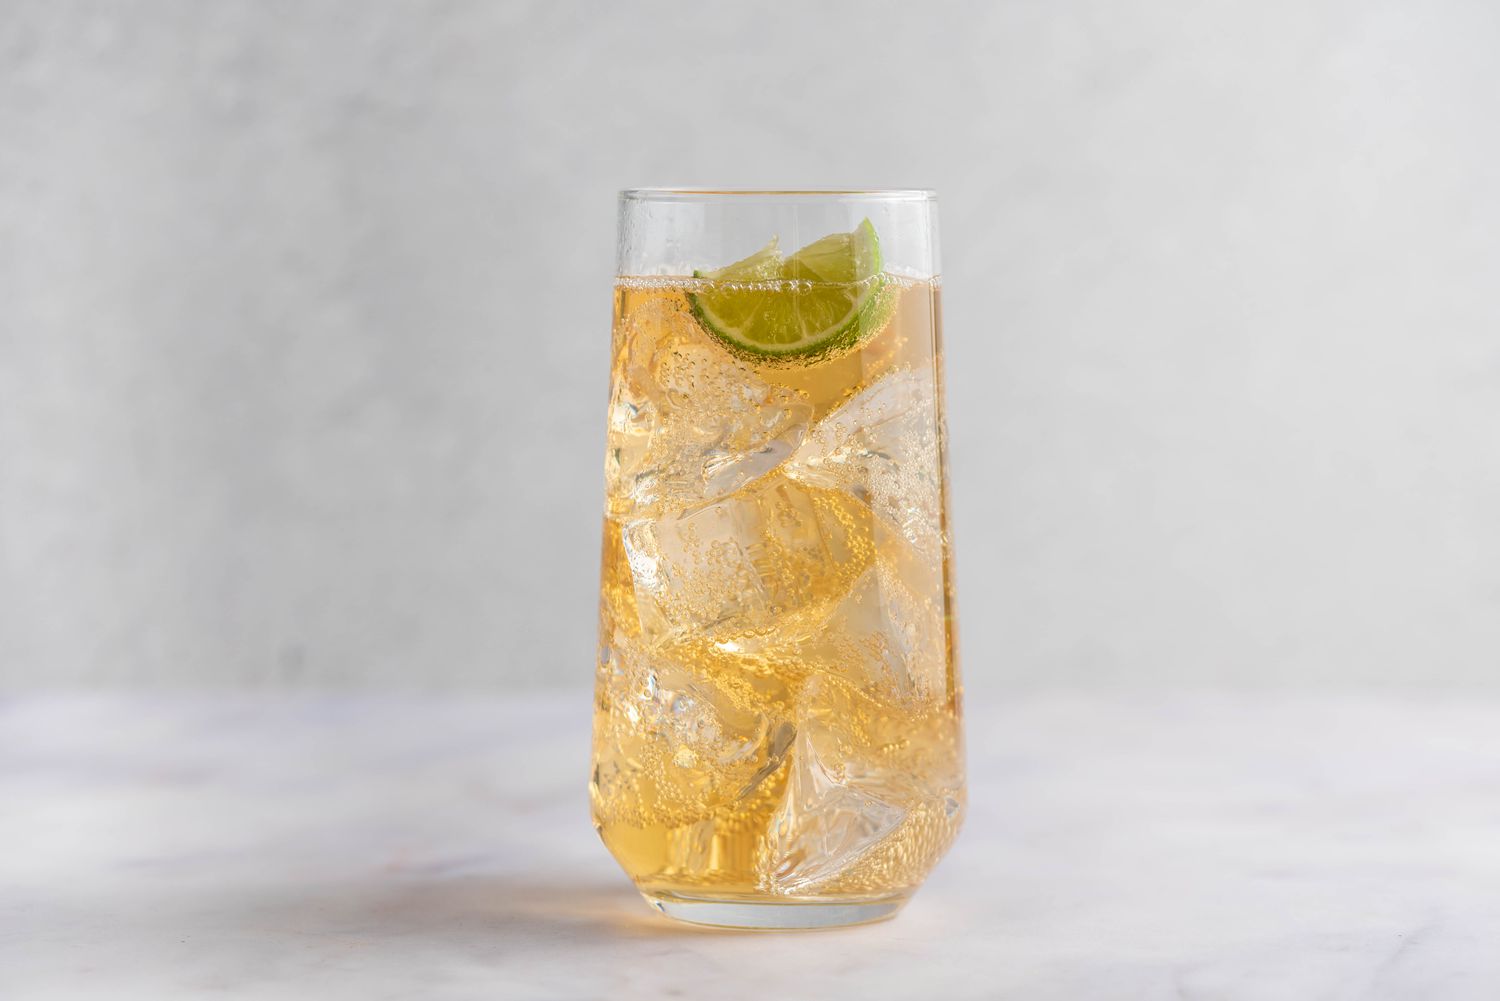 Alcoholic Drinks To Mix With Ginger Ale